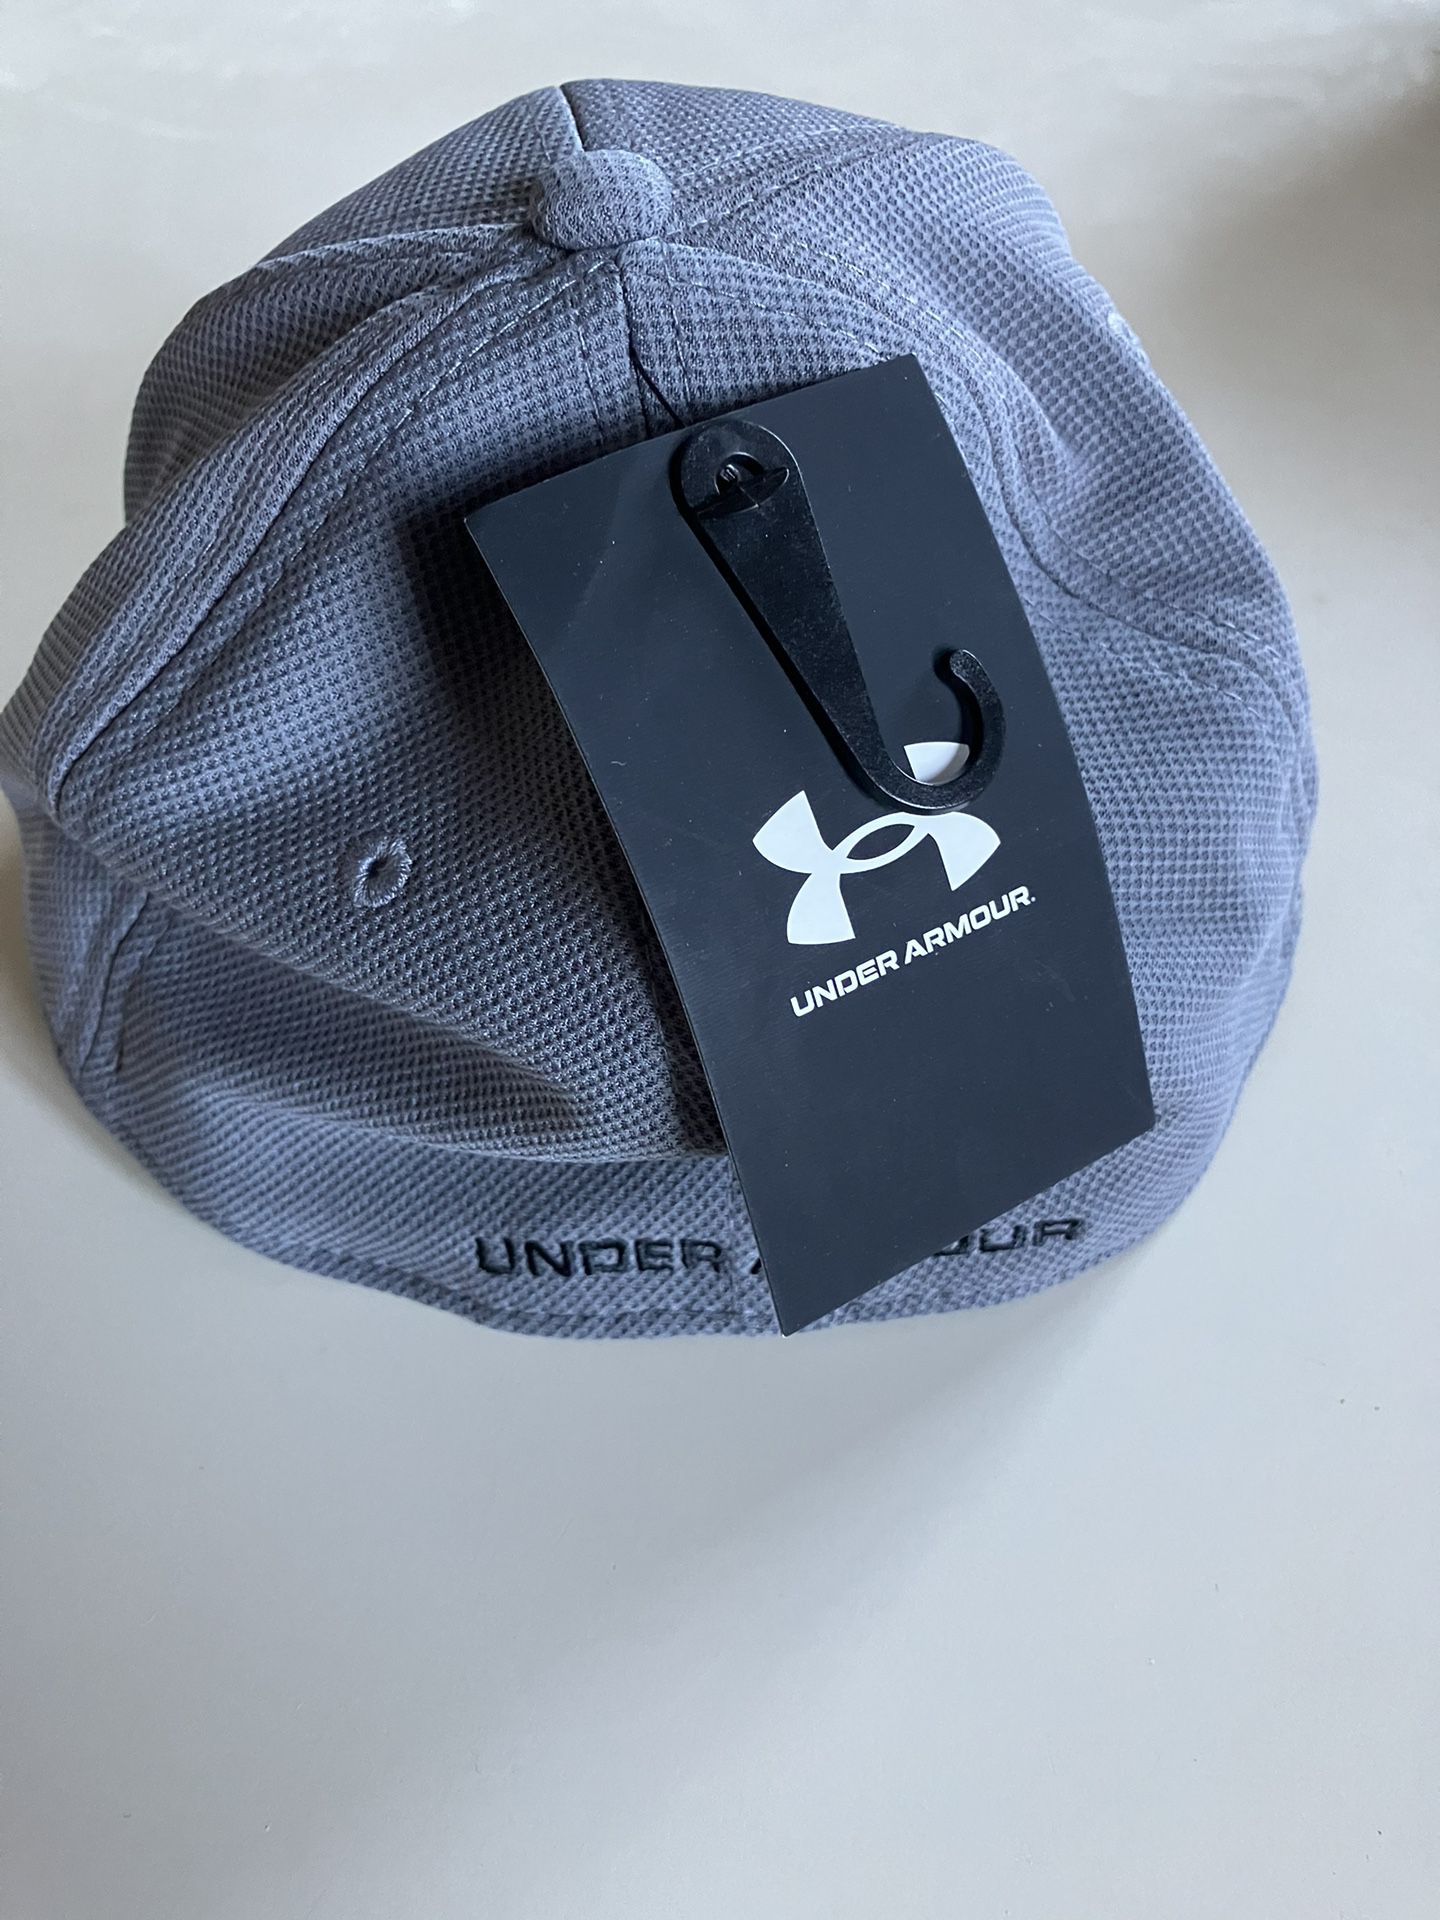 Under armor Cap Men's Size S/M for Sale in Lakewood, CA - OfferUp